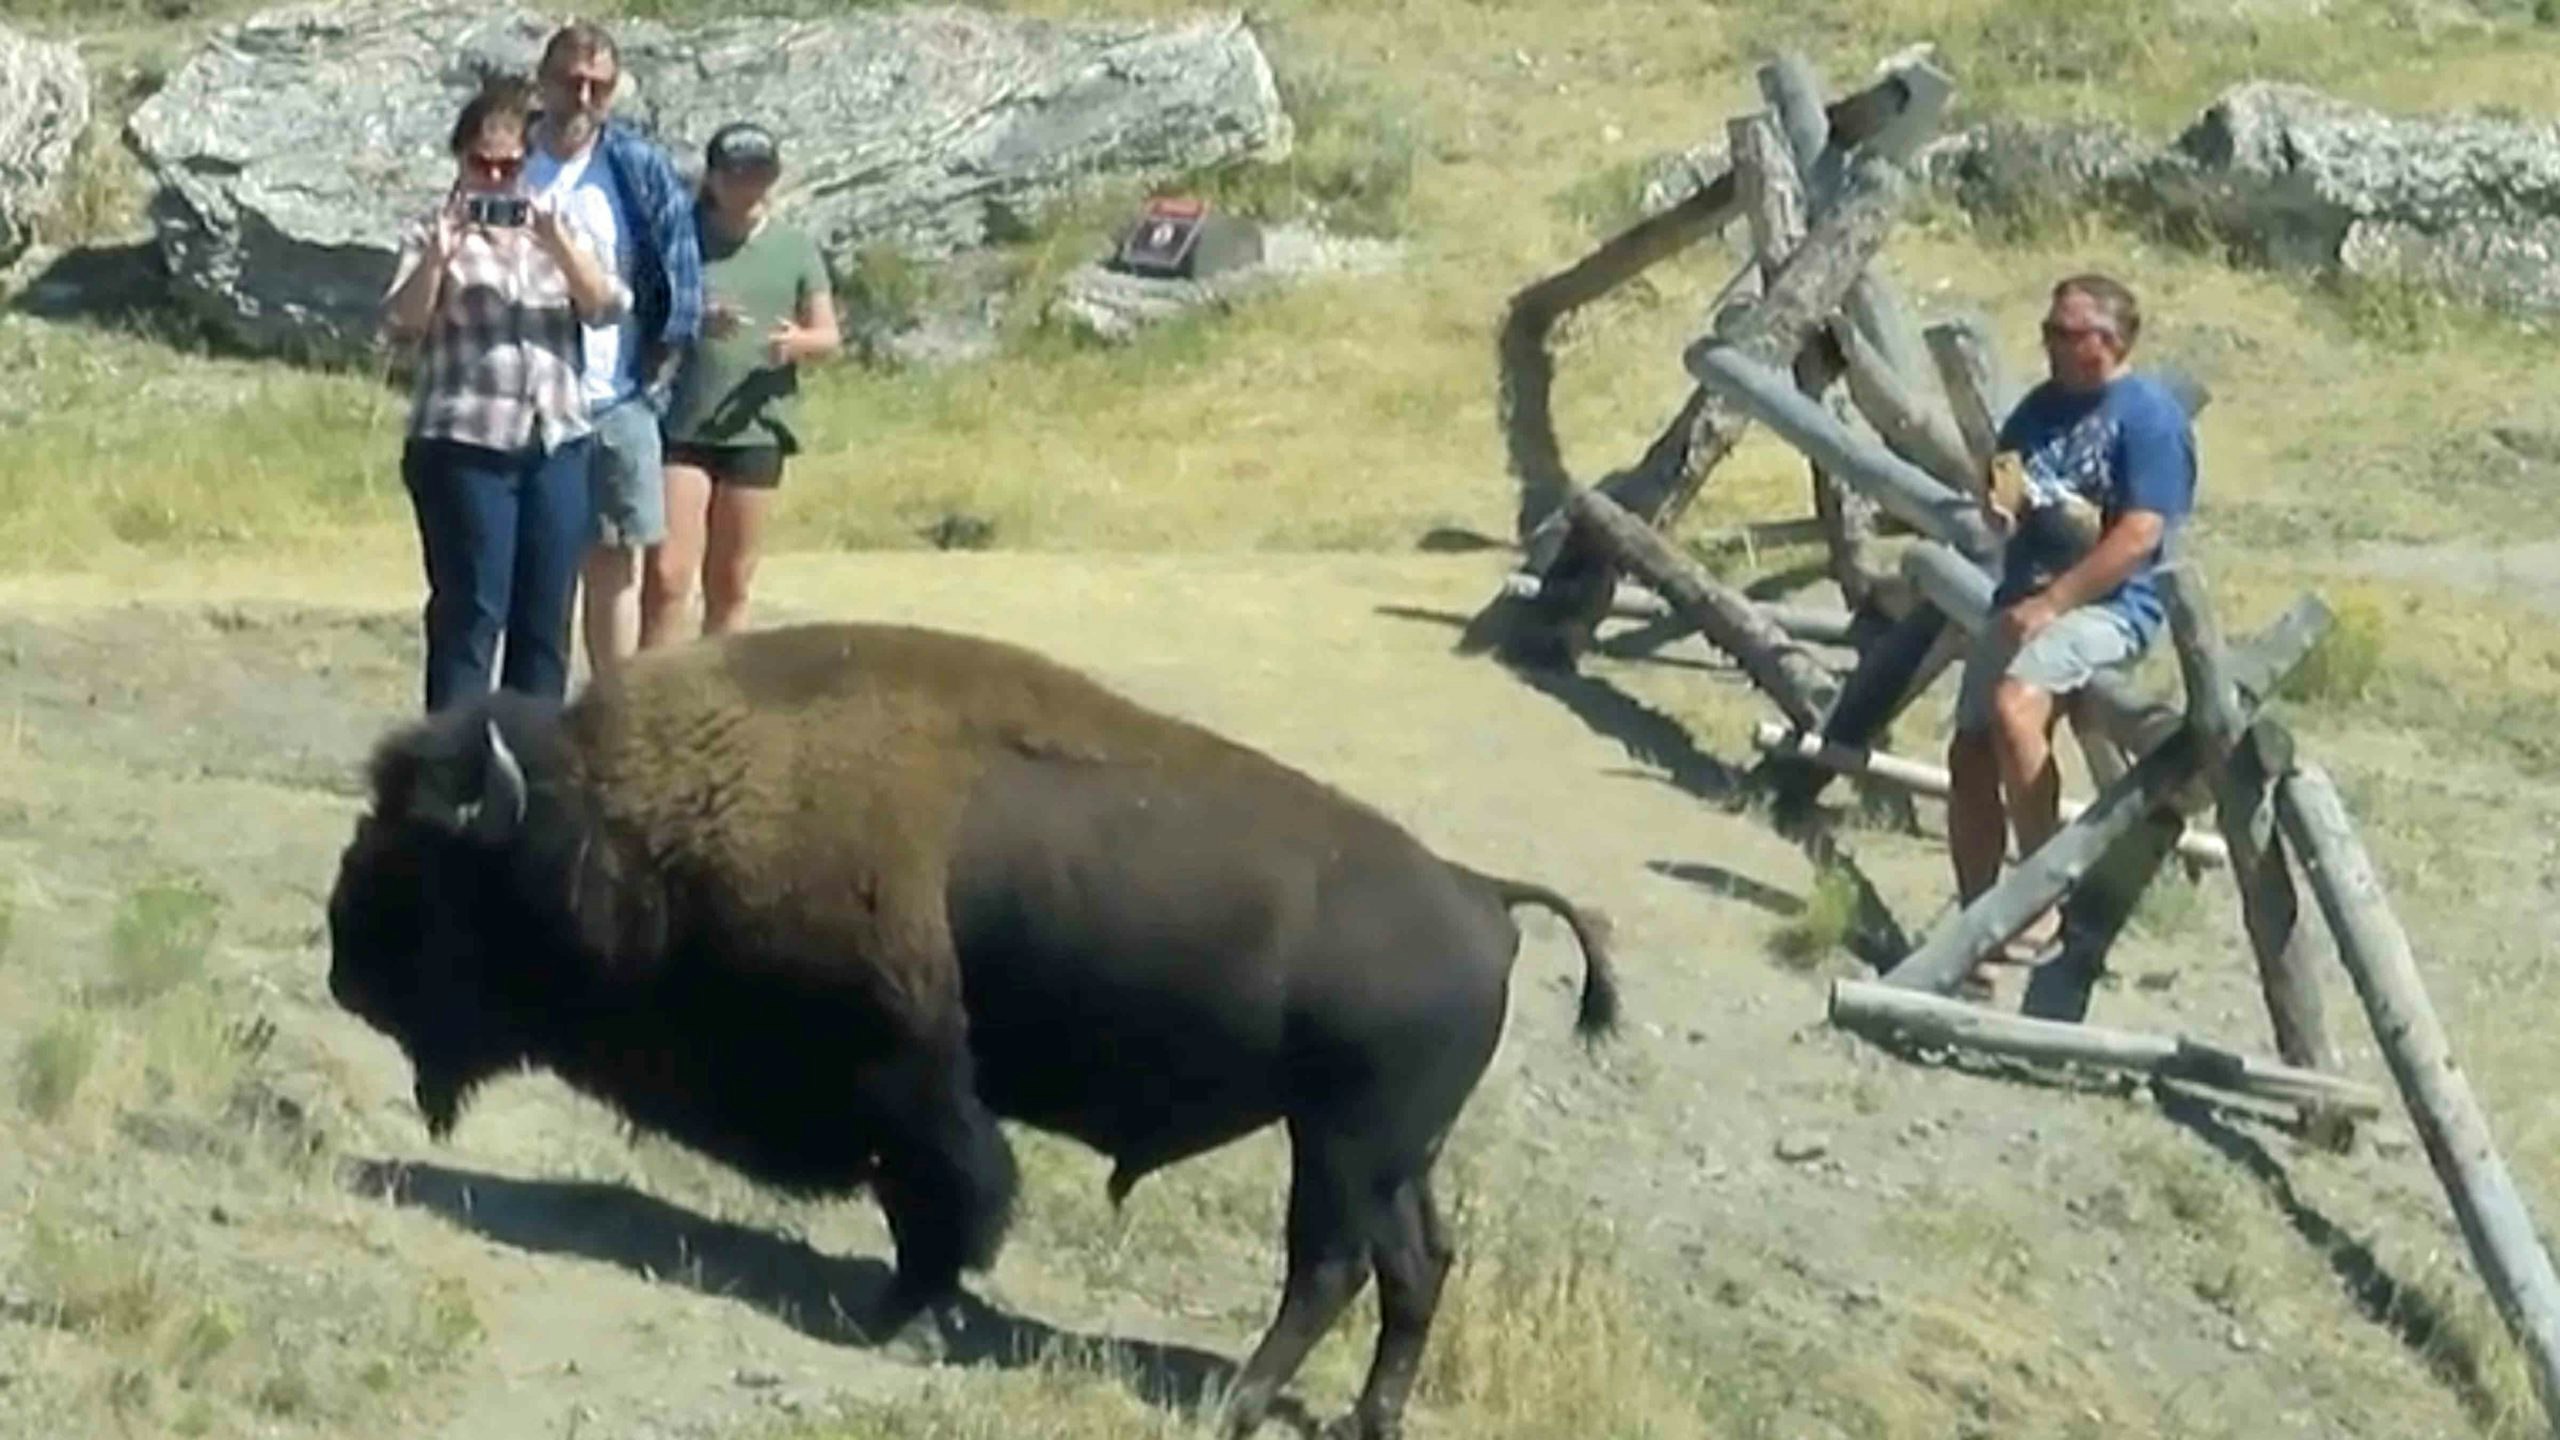 Yellowstone National Park visitors get close to a bison in this file photo.